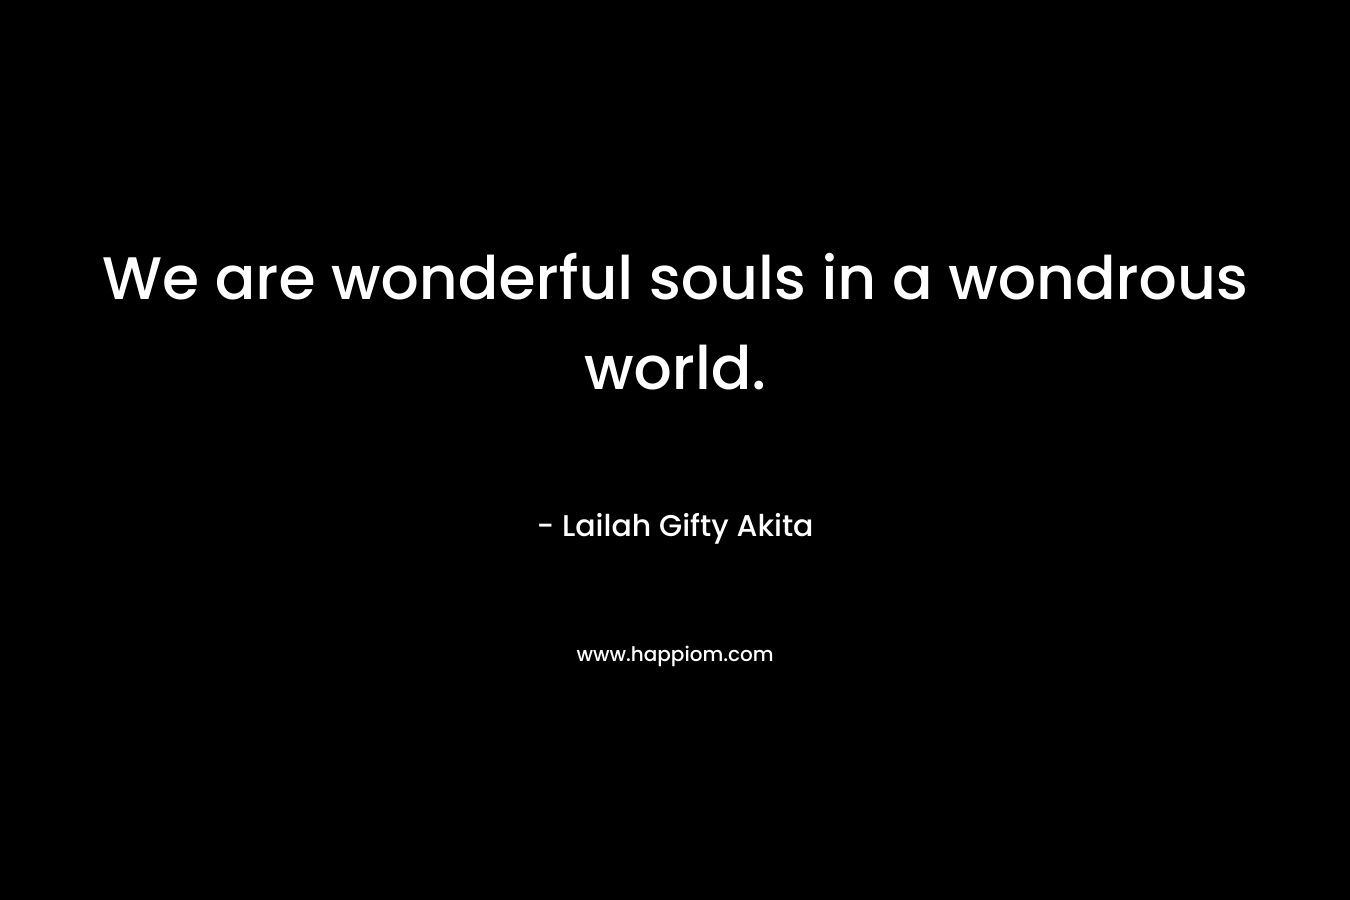 We are wonderful souls in a wondrous world.